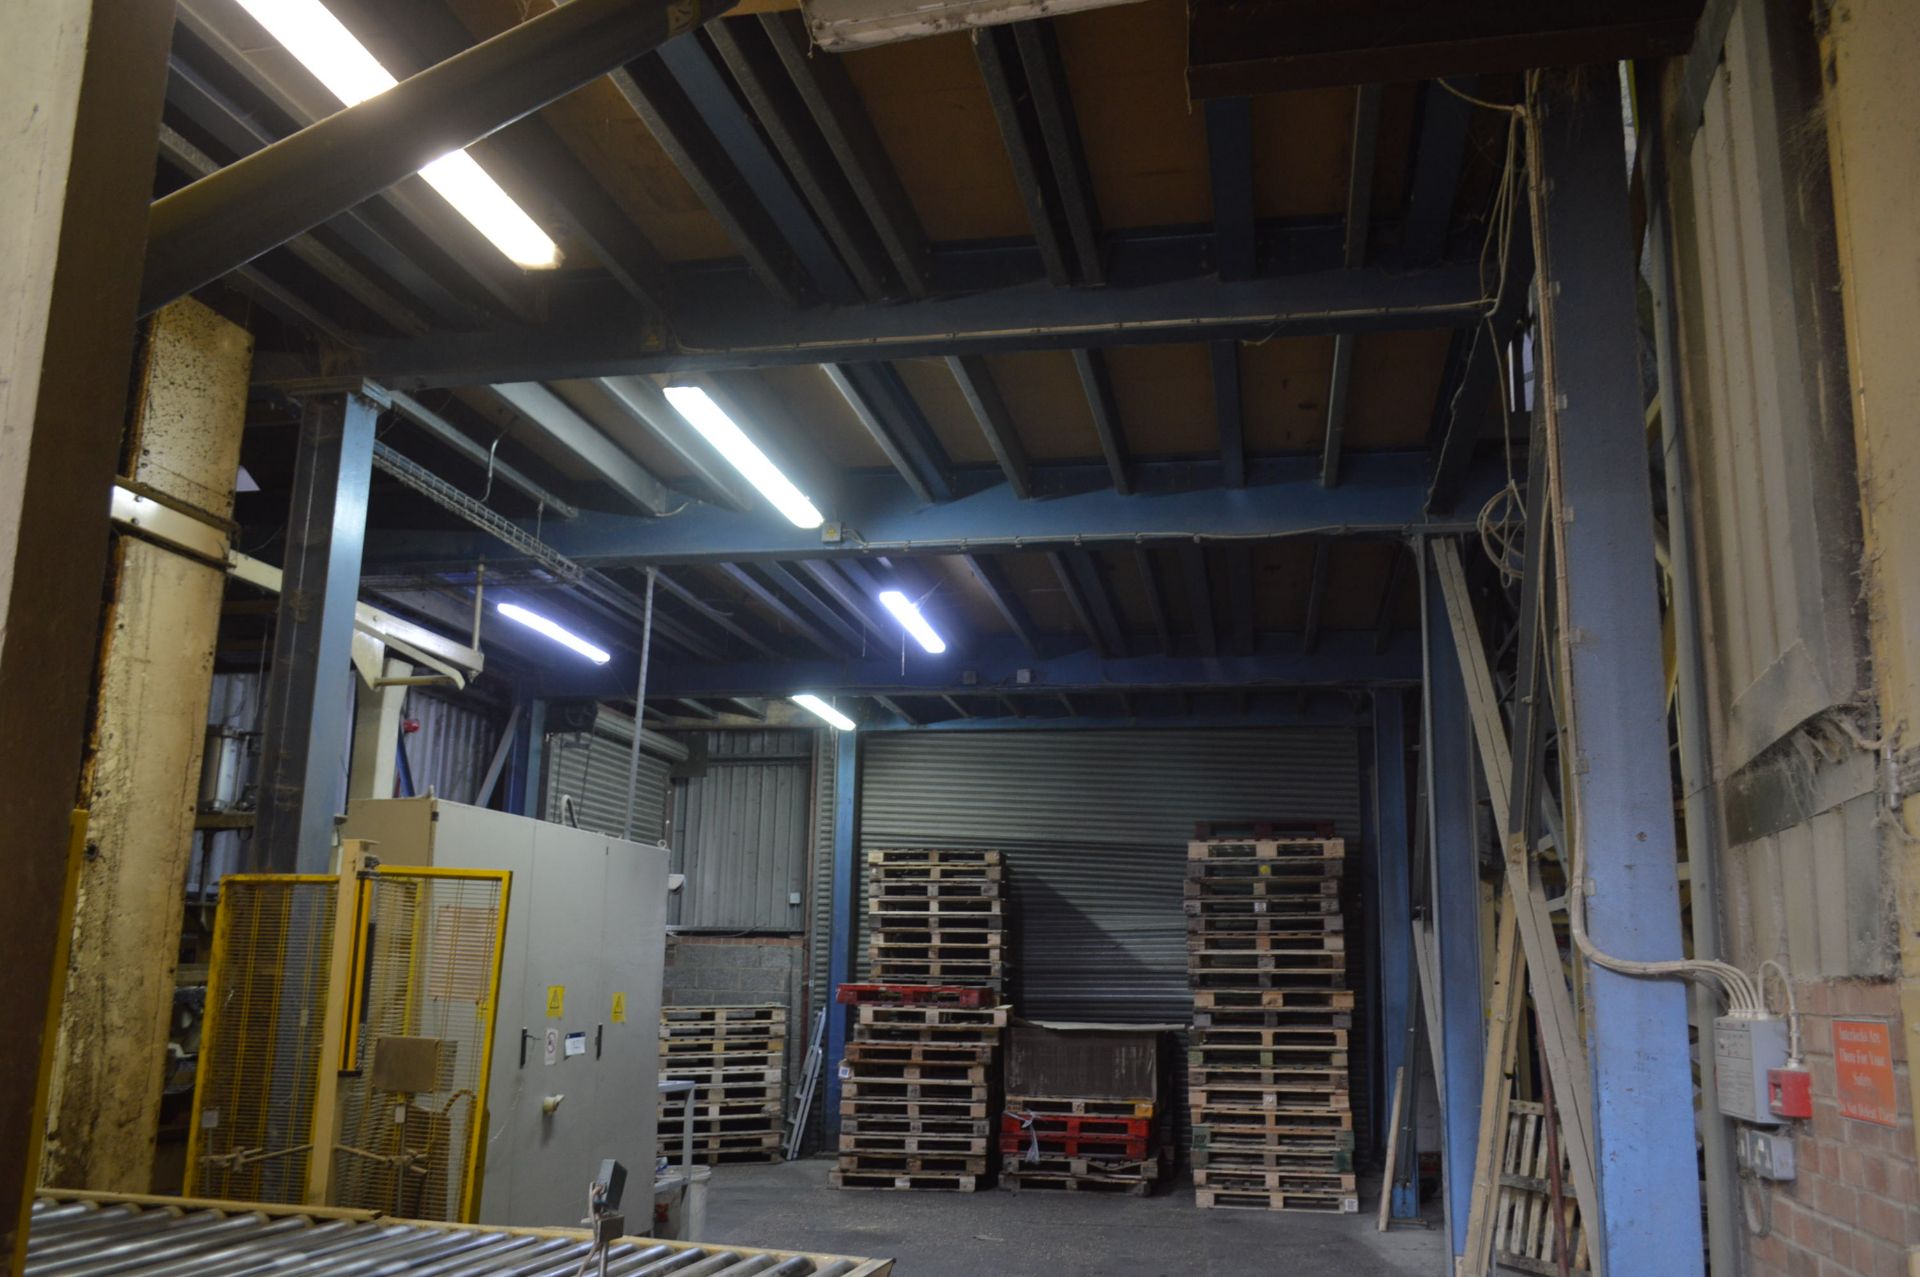 BOLTED SECTIONAL STEEL FRAMED MEZZANINE FLOOR, approx. 18.5m x 6.9m x 4.4m high (to floor), with - Bild 3 aus 5